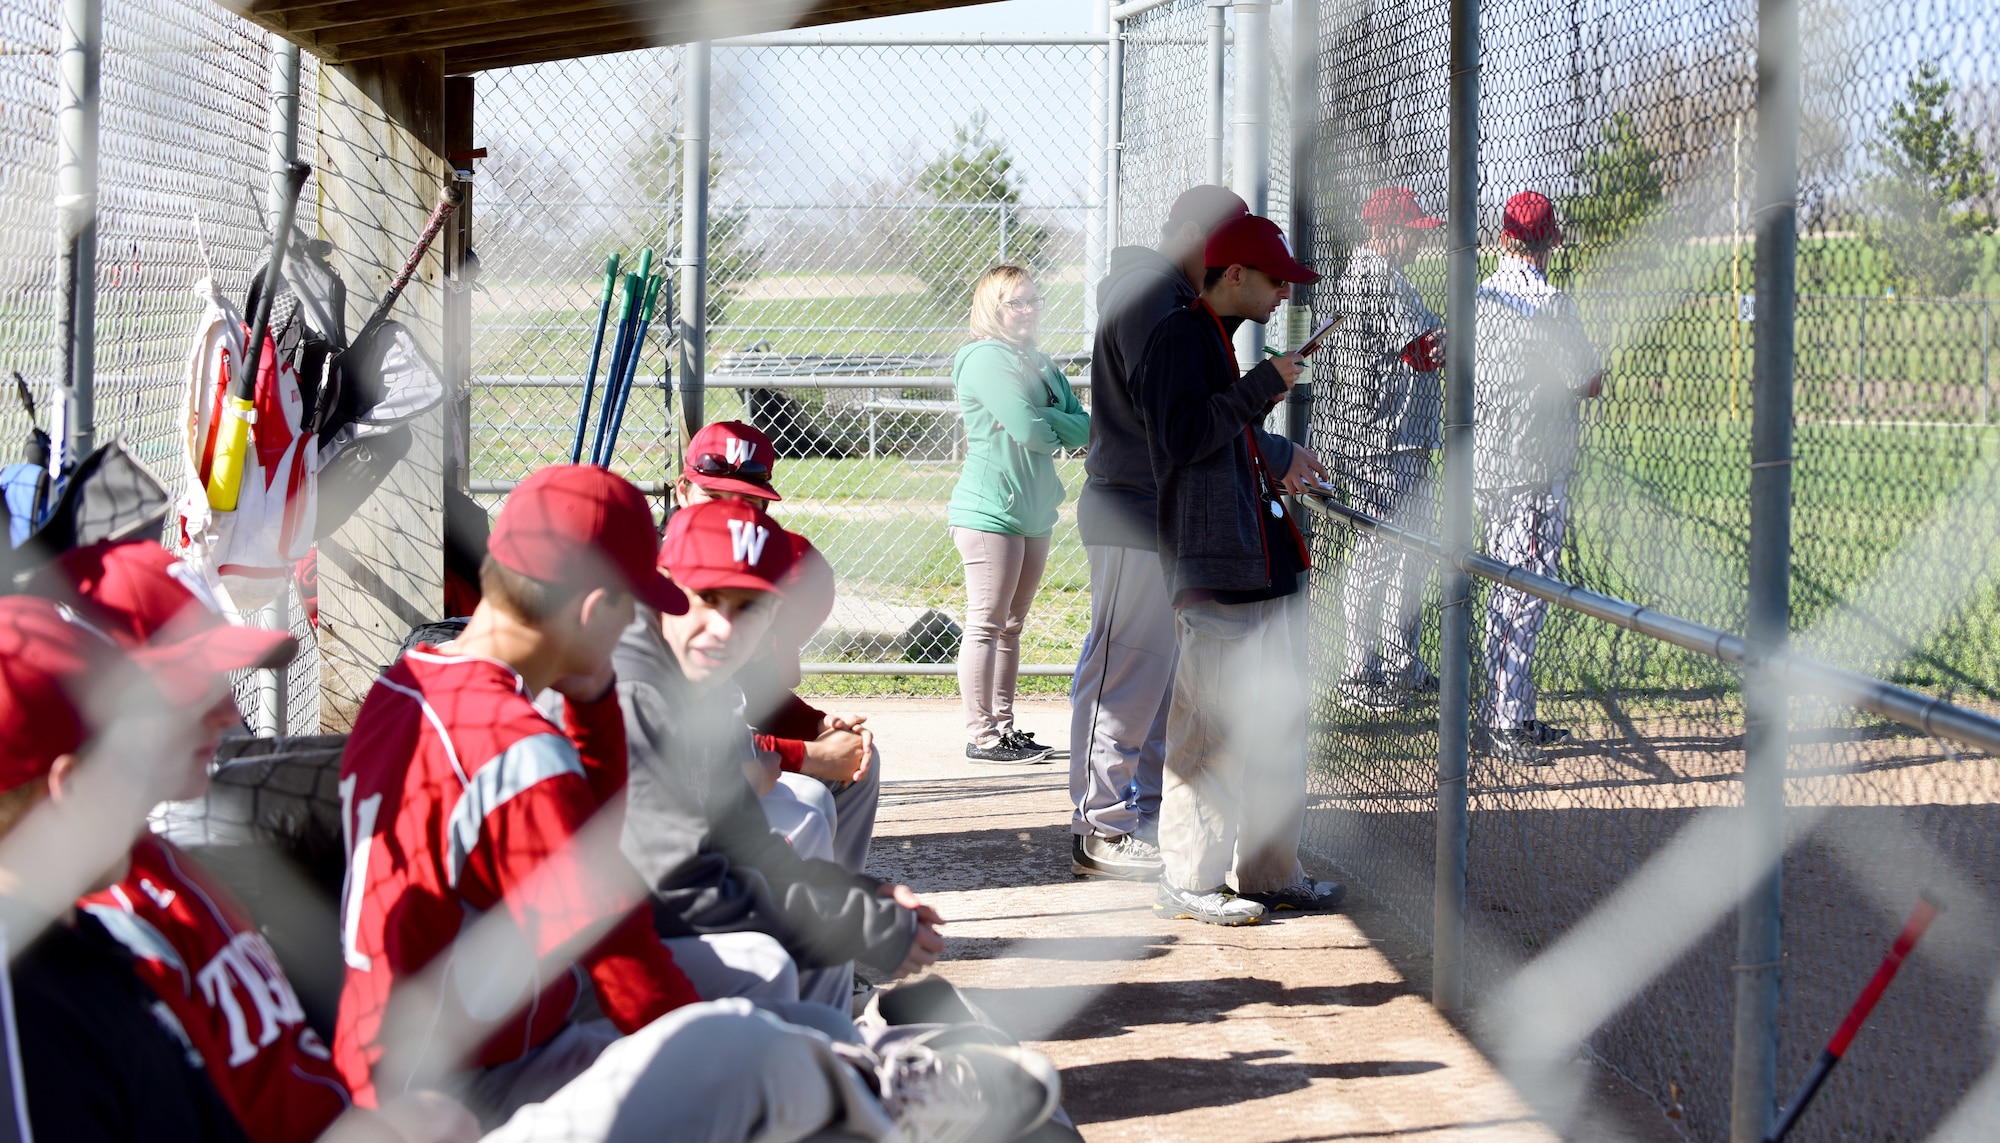 Andy Martins, a manager for the Warrensburg High School baseball team, watches the game at West Park in Warrensburg, Mo., April 16, 2018. Even though he has autism, Andy is a vital member of the team. He ensures the pitchers do not exceed the limit number of throws per game, which is put in place to prevent injury. (U.S. Air Force photo by Staff Sgt. Danielle Quilla)